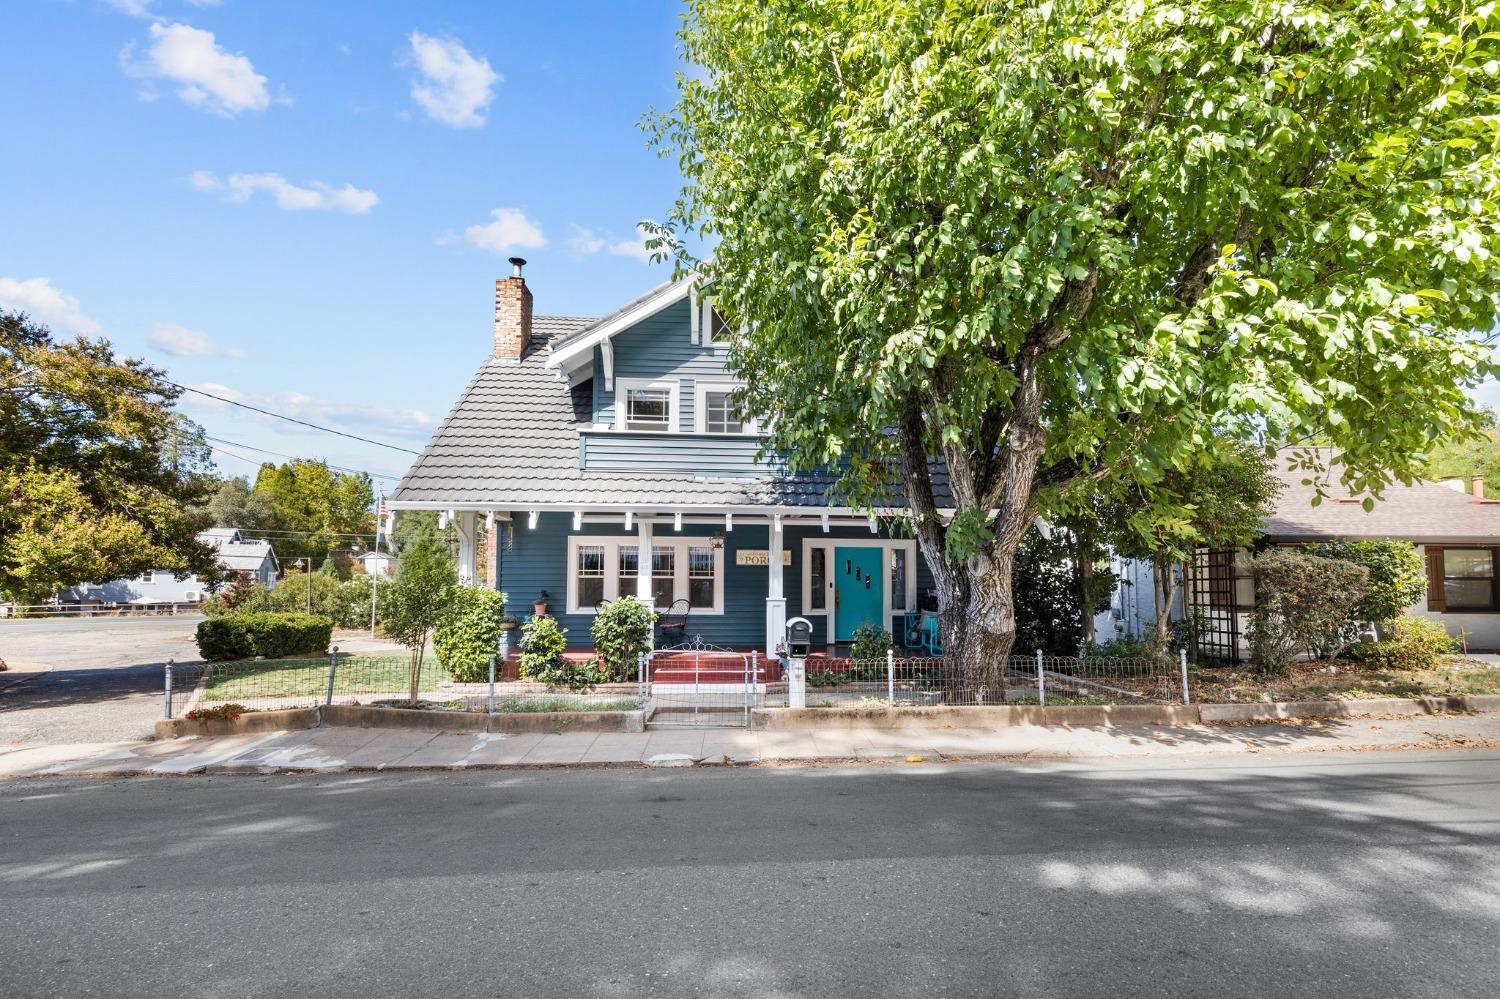 1906 Craftsman beauty. This home has been meticulously restored & remodeled by its present owners. This home was in the same family for 108 years! You step up to the home & you are greeted by the large front porch perfect for relaxing. As you open the wide front door, flanked on both side by stained glass windows, you step in to the large parlor. As you pass through the wood beam & colunms into the living room with its tiled fireplace & wood burning insert, you will see two additional stained glass windows. The large dining room as stained & painted wood paneling & a built-in hutch. The kitchen was expanded & is an entertainers dream. Tons of cabinet space and large island with quartz countertops. Elmira dual fuel range/oven. The large farm style sink looks out 3 windows that let in lots of natural light. There is a laundry room off of the kitchen with built in cabinets & folding counter. There is a bedroom & full bath on the main level. Upstairs you will find the primary suite with a full bath & walk-in closet. There are 2 other bedrooms upstairs & attic space for storage. The backyard has a covered kitchen/BBQ area with tile counters, sink, & bar seating. The home has a full basement for storage & the homes mechanicals. Just 9 miles from Sutter Creek in affordable Jackson.